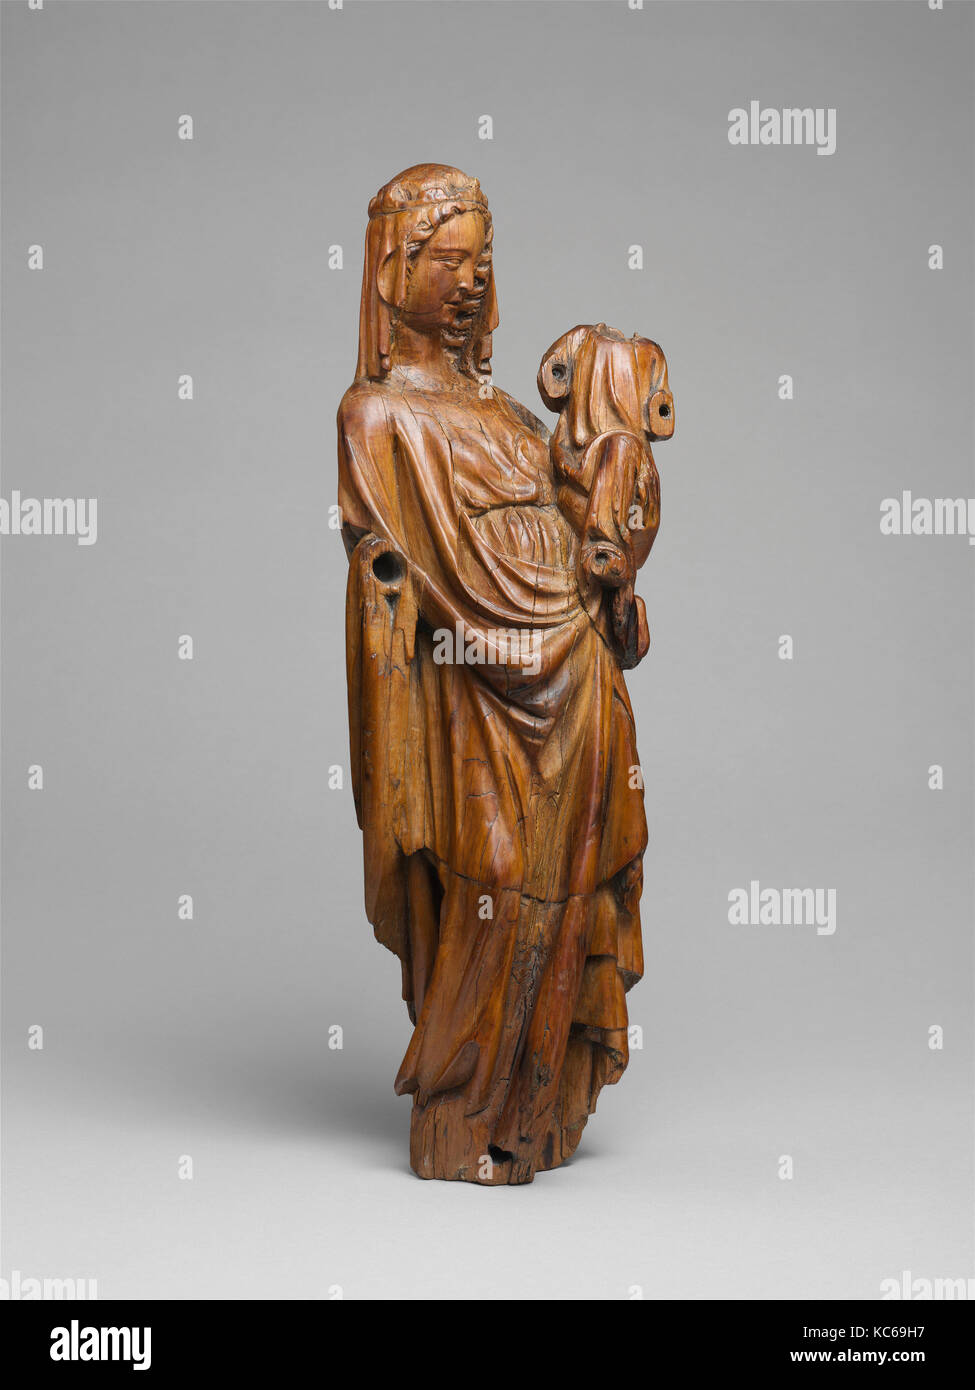 Virgin and Child, ca. 1300, North French, Boxwood, Overall: 14 5/16 x 5 1/4 x 3 1/4 in. (36.4 x 13.4 x 8.3 cm), Sculpture-Wood Stock Photo